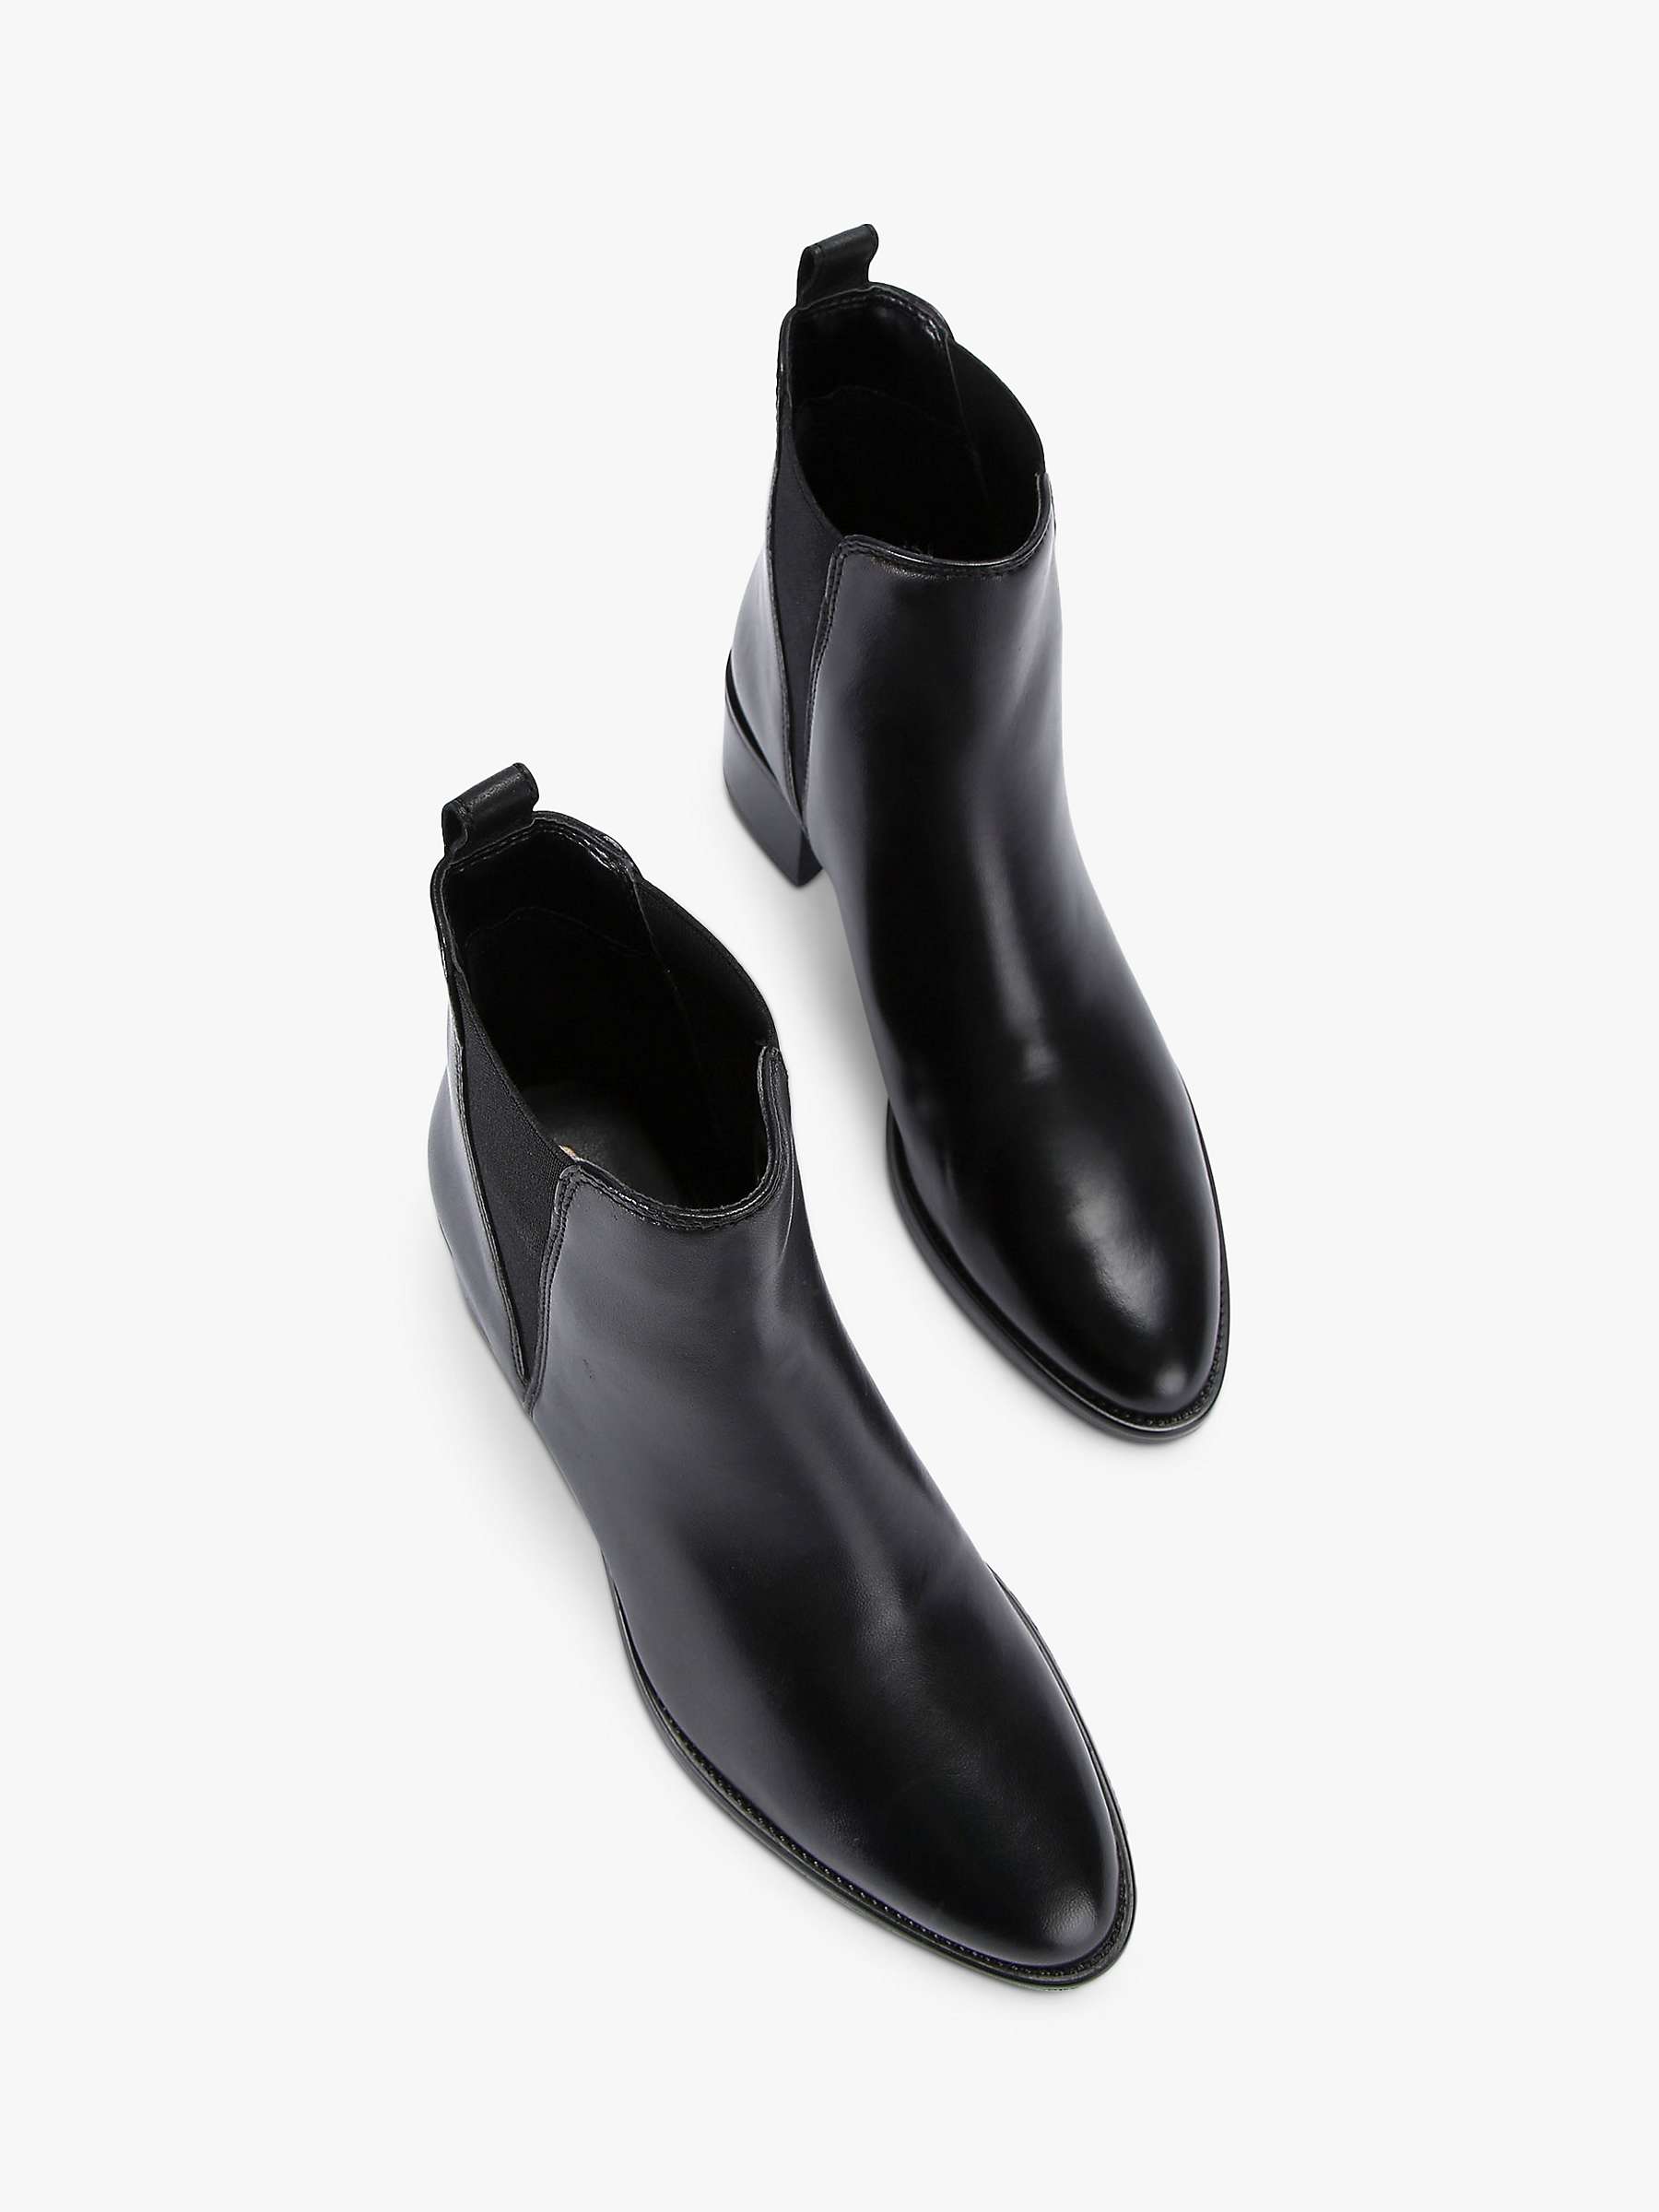 Carvela Spectate Leather Chelsea Boots, Black at John Lewis & Partners